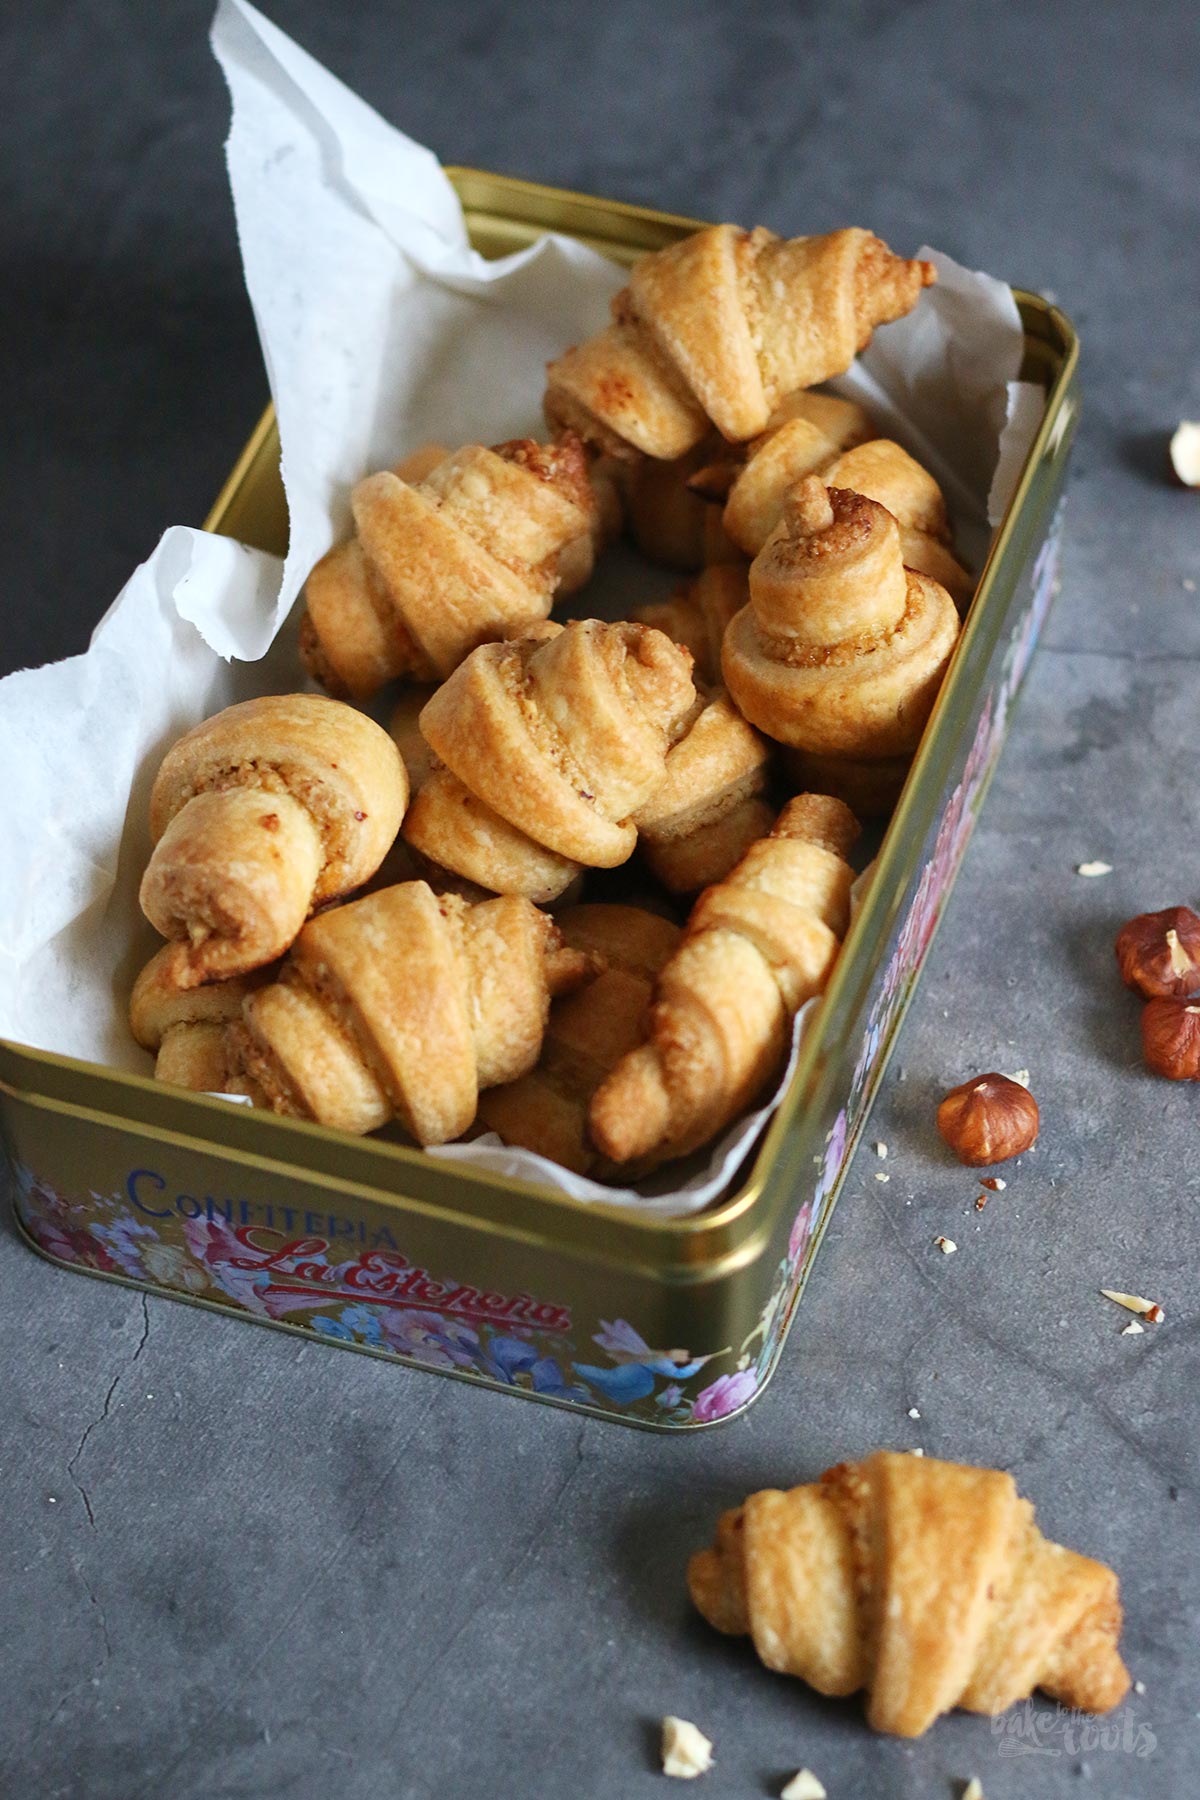 Easy Hazelnut Rugelach | Bake to the roots